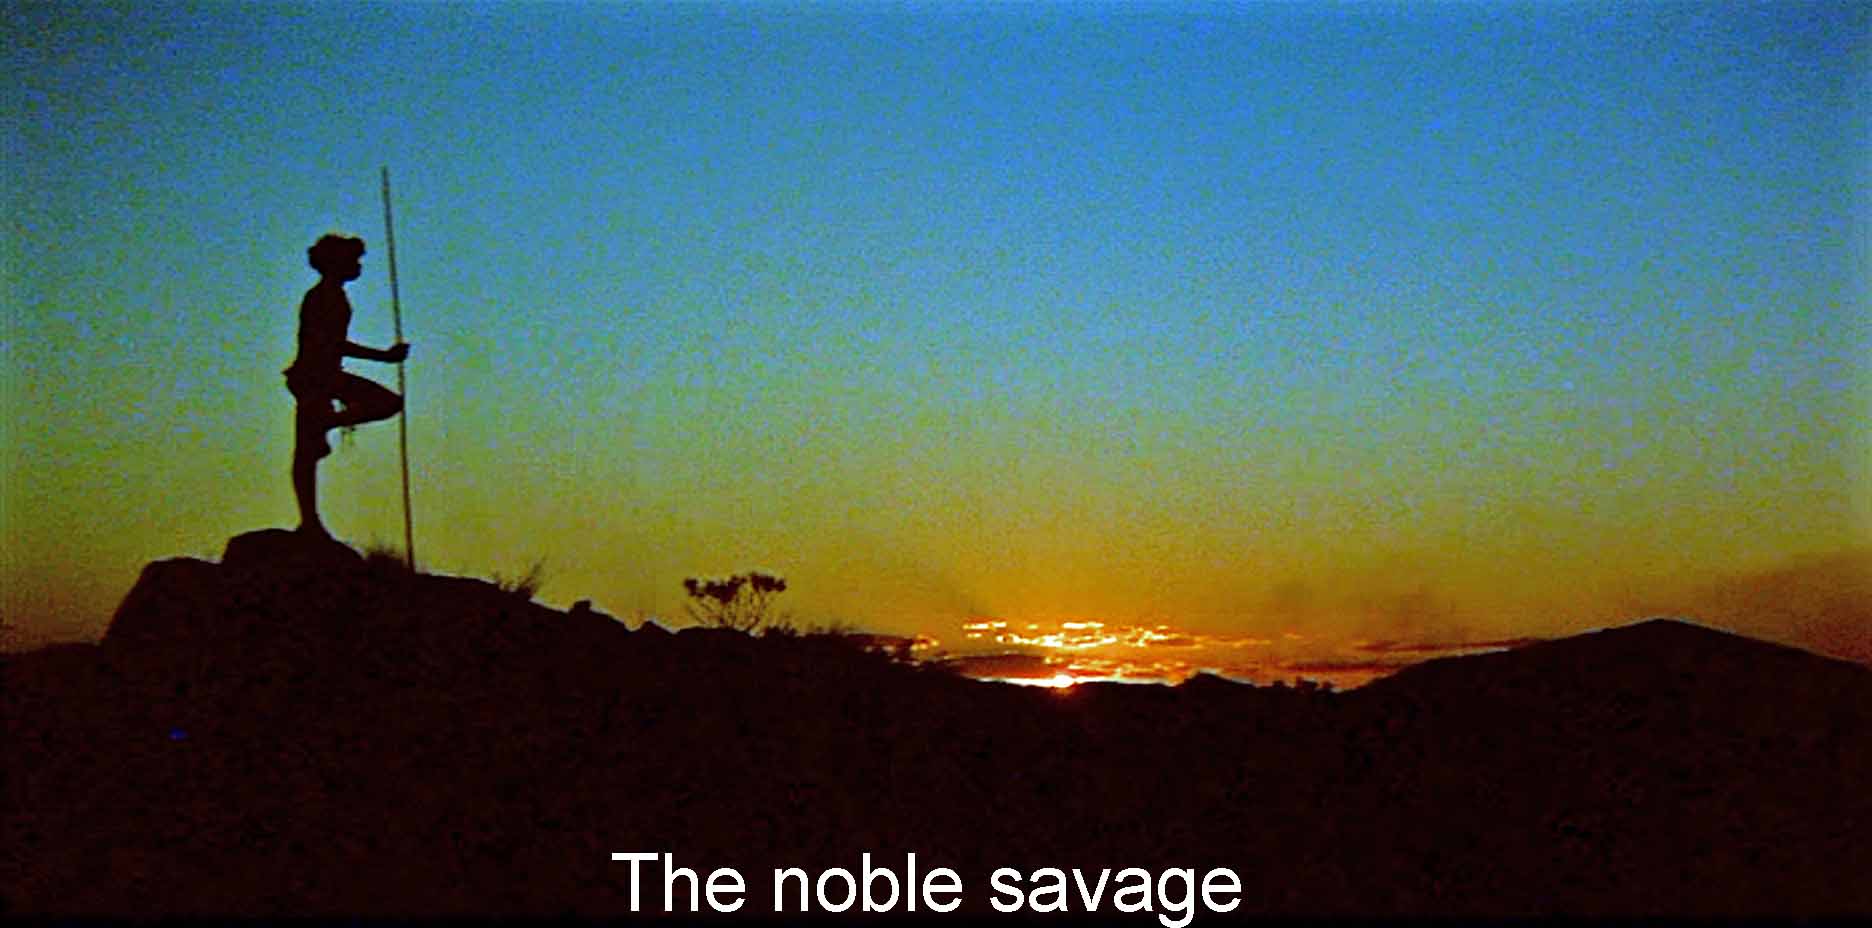 The noble savage